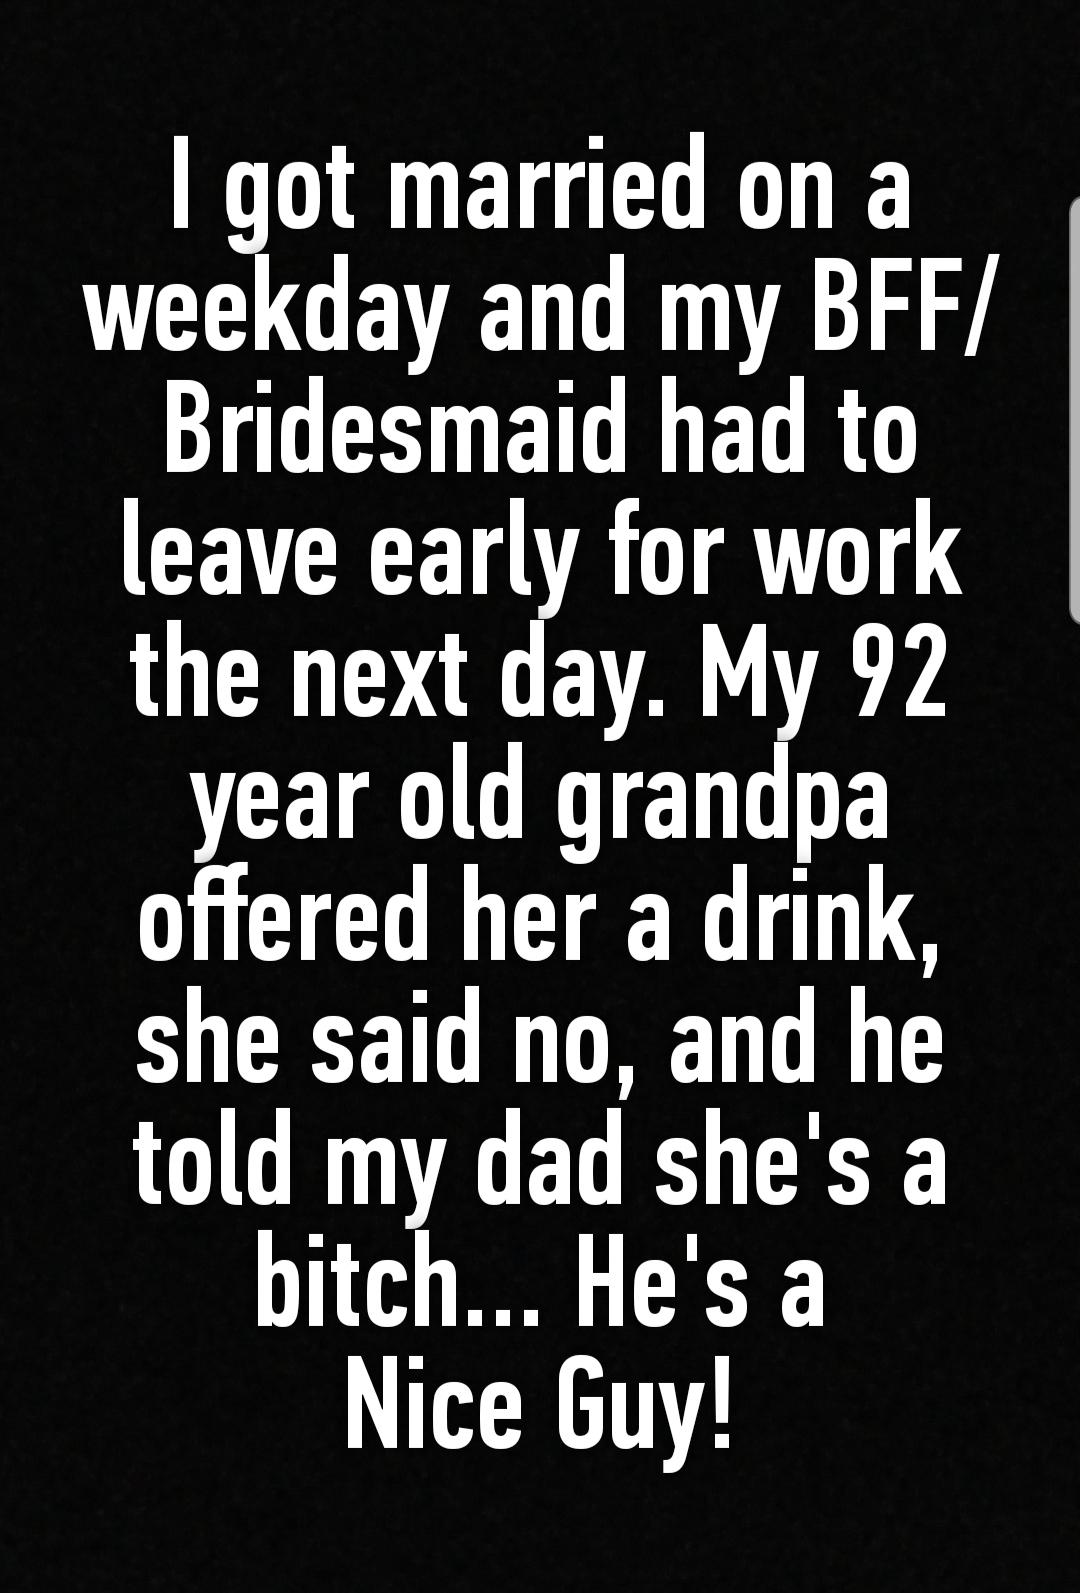 bandama caldera - I got married on a weekday and my Bff Bridesmaid had to leave early for work the next day. My 92 year old grandpa offered her a drink, she said no, and he told my dad she's a bitch... He's a Nice Guy!